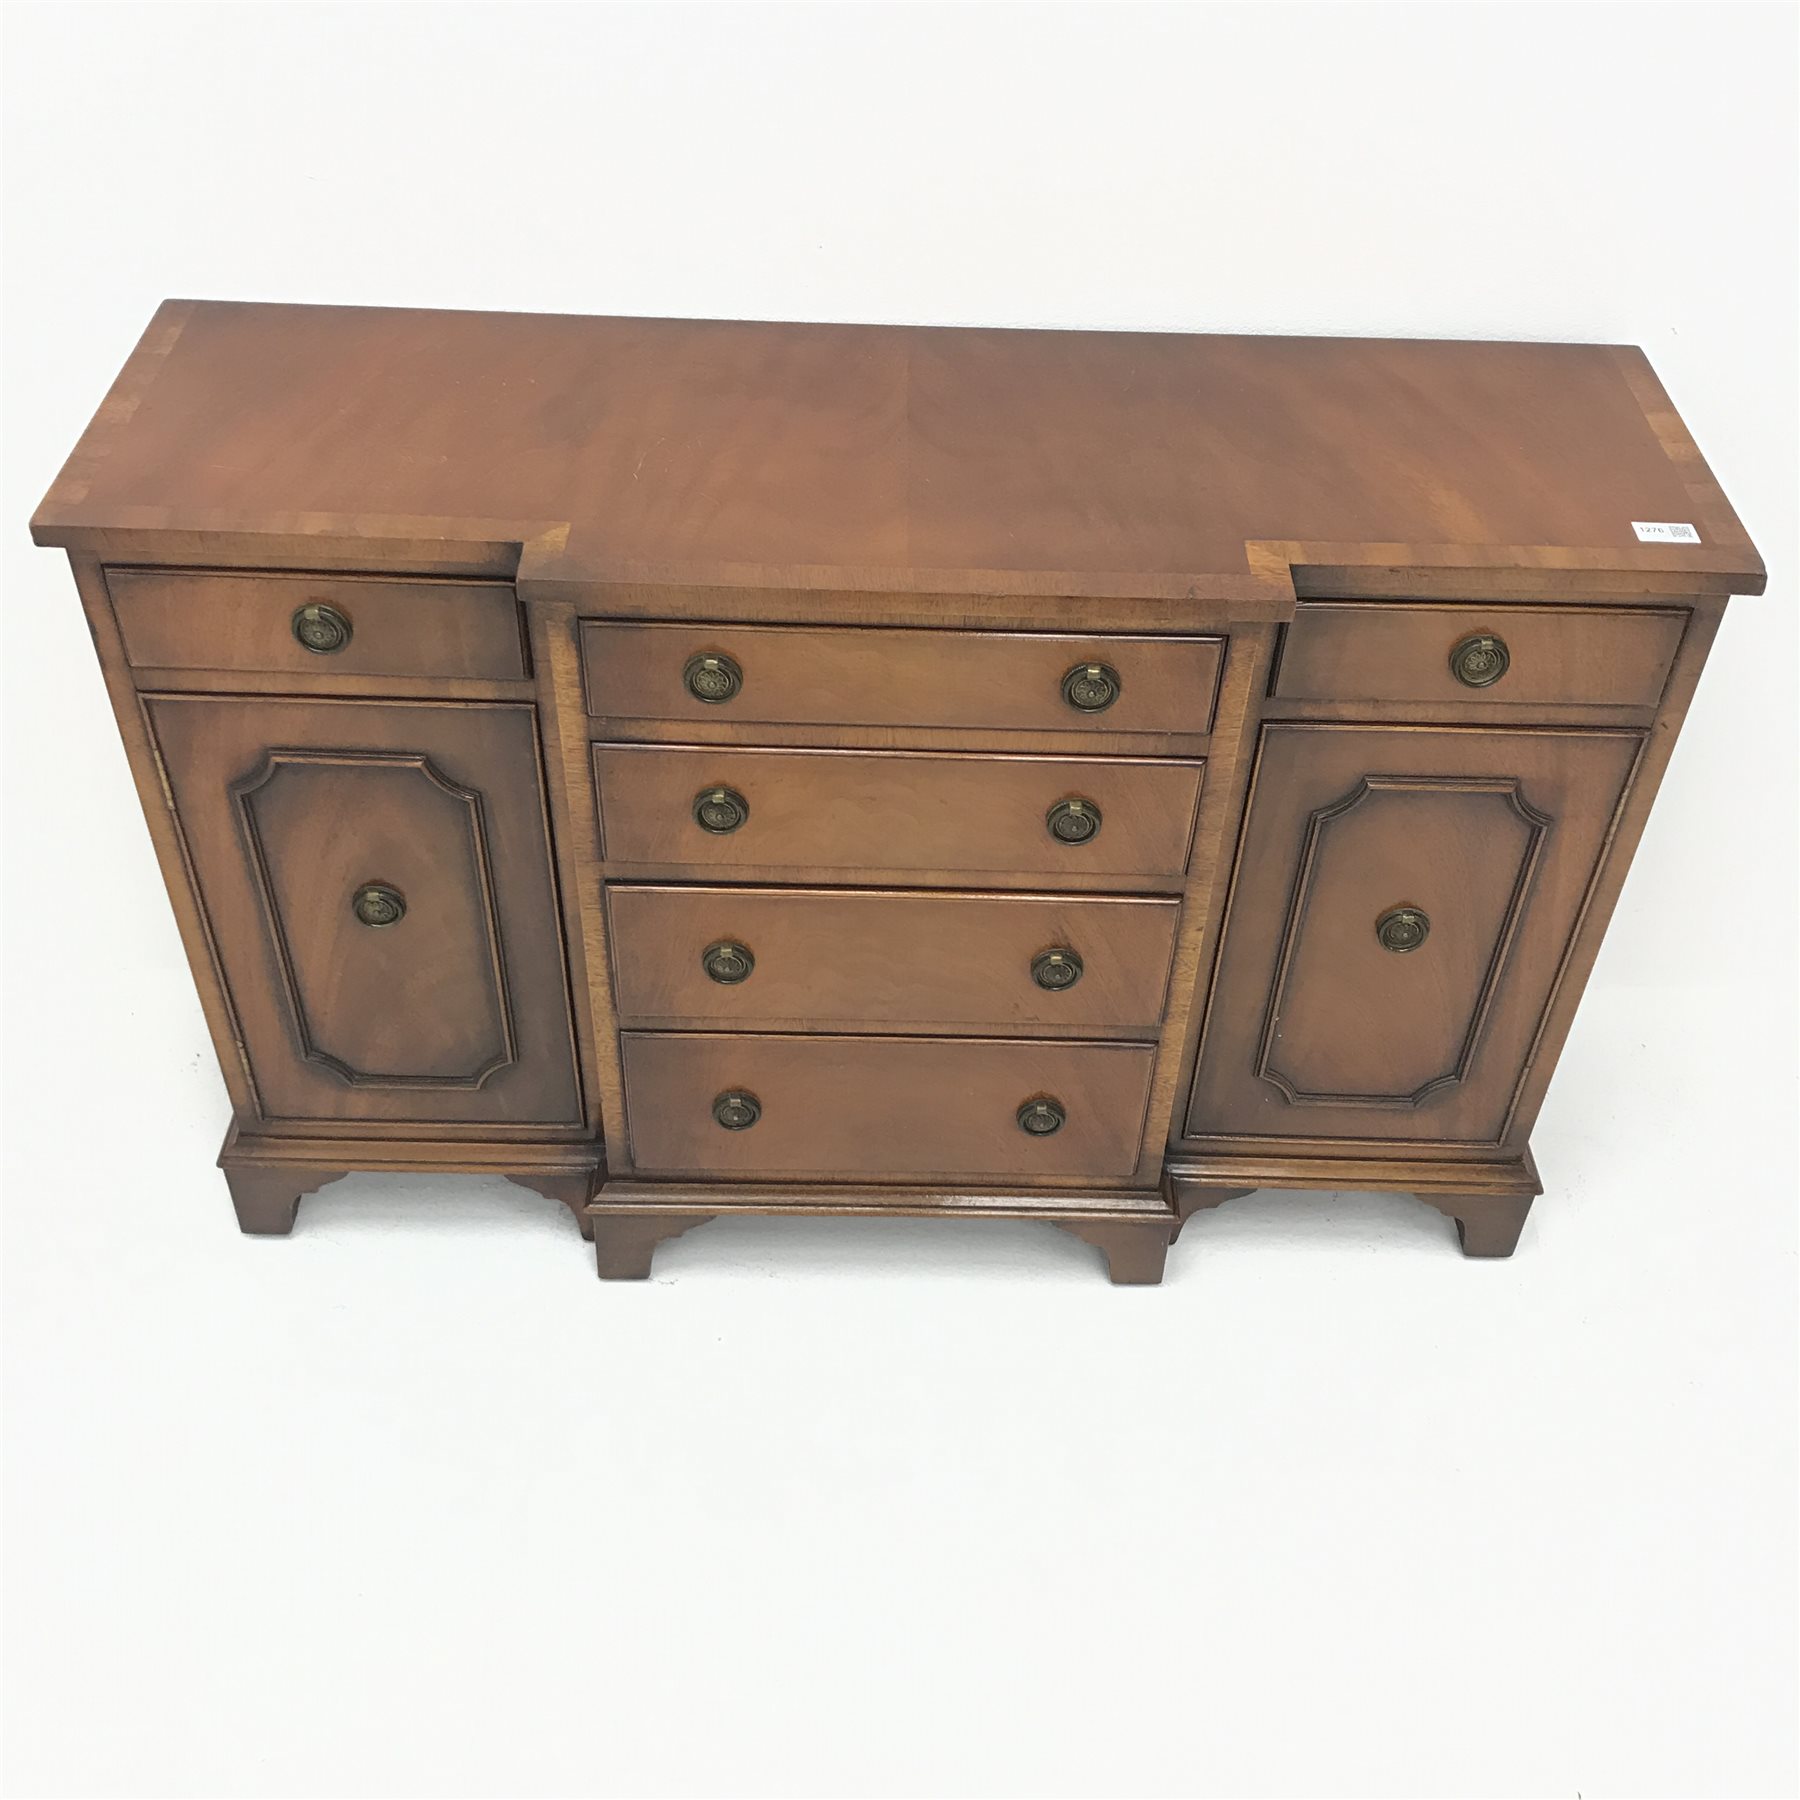 Bevan Funnell Reprodux small cross banded mahogany breakfront sideboard, six drawers, two cupboards, - Image 3 of 10